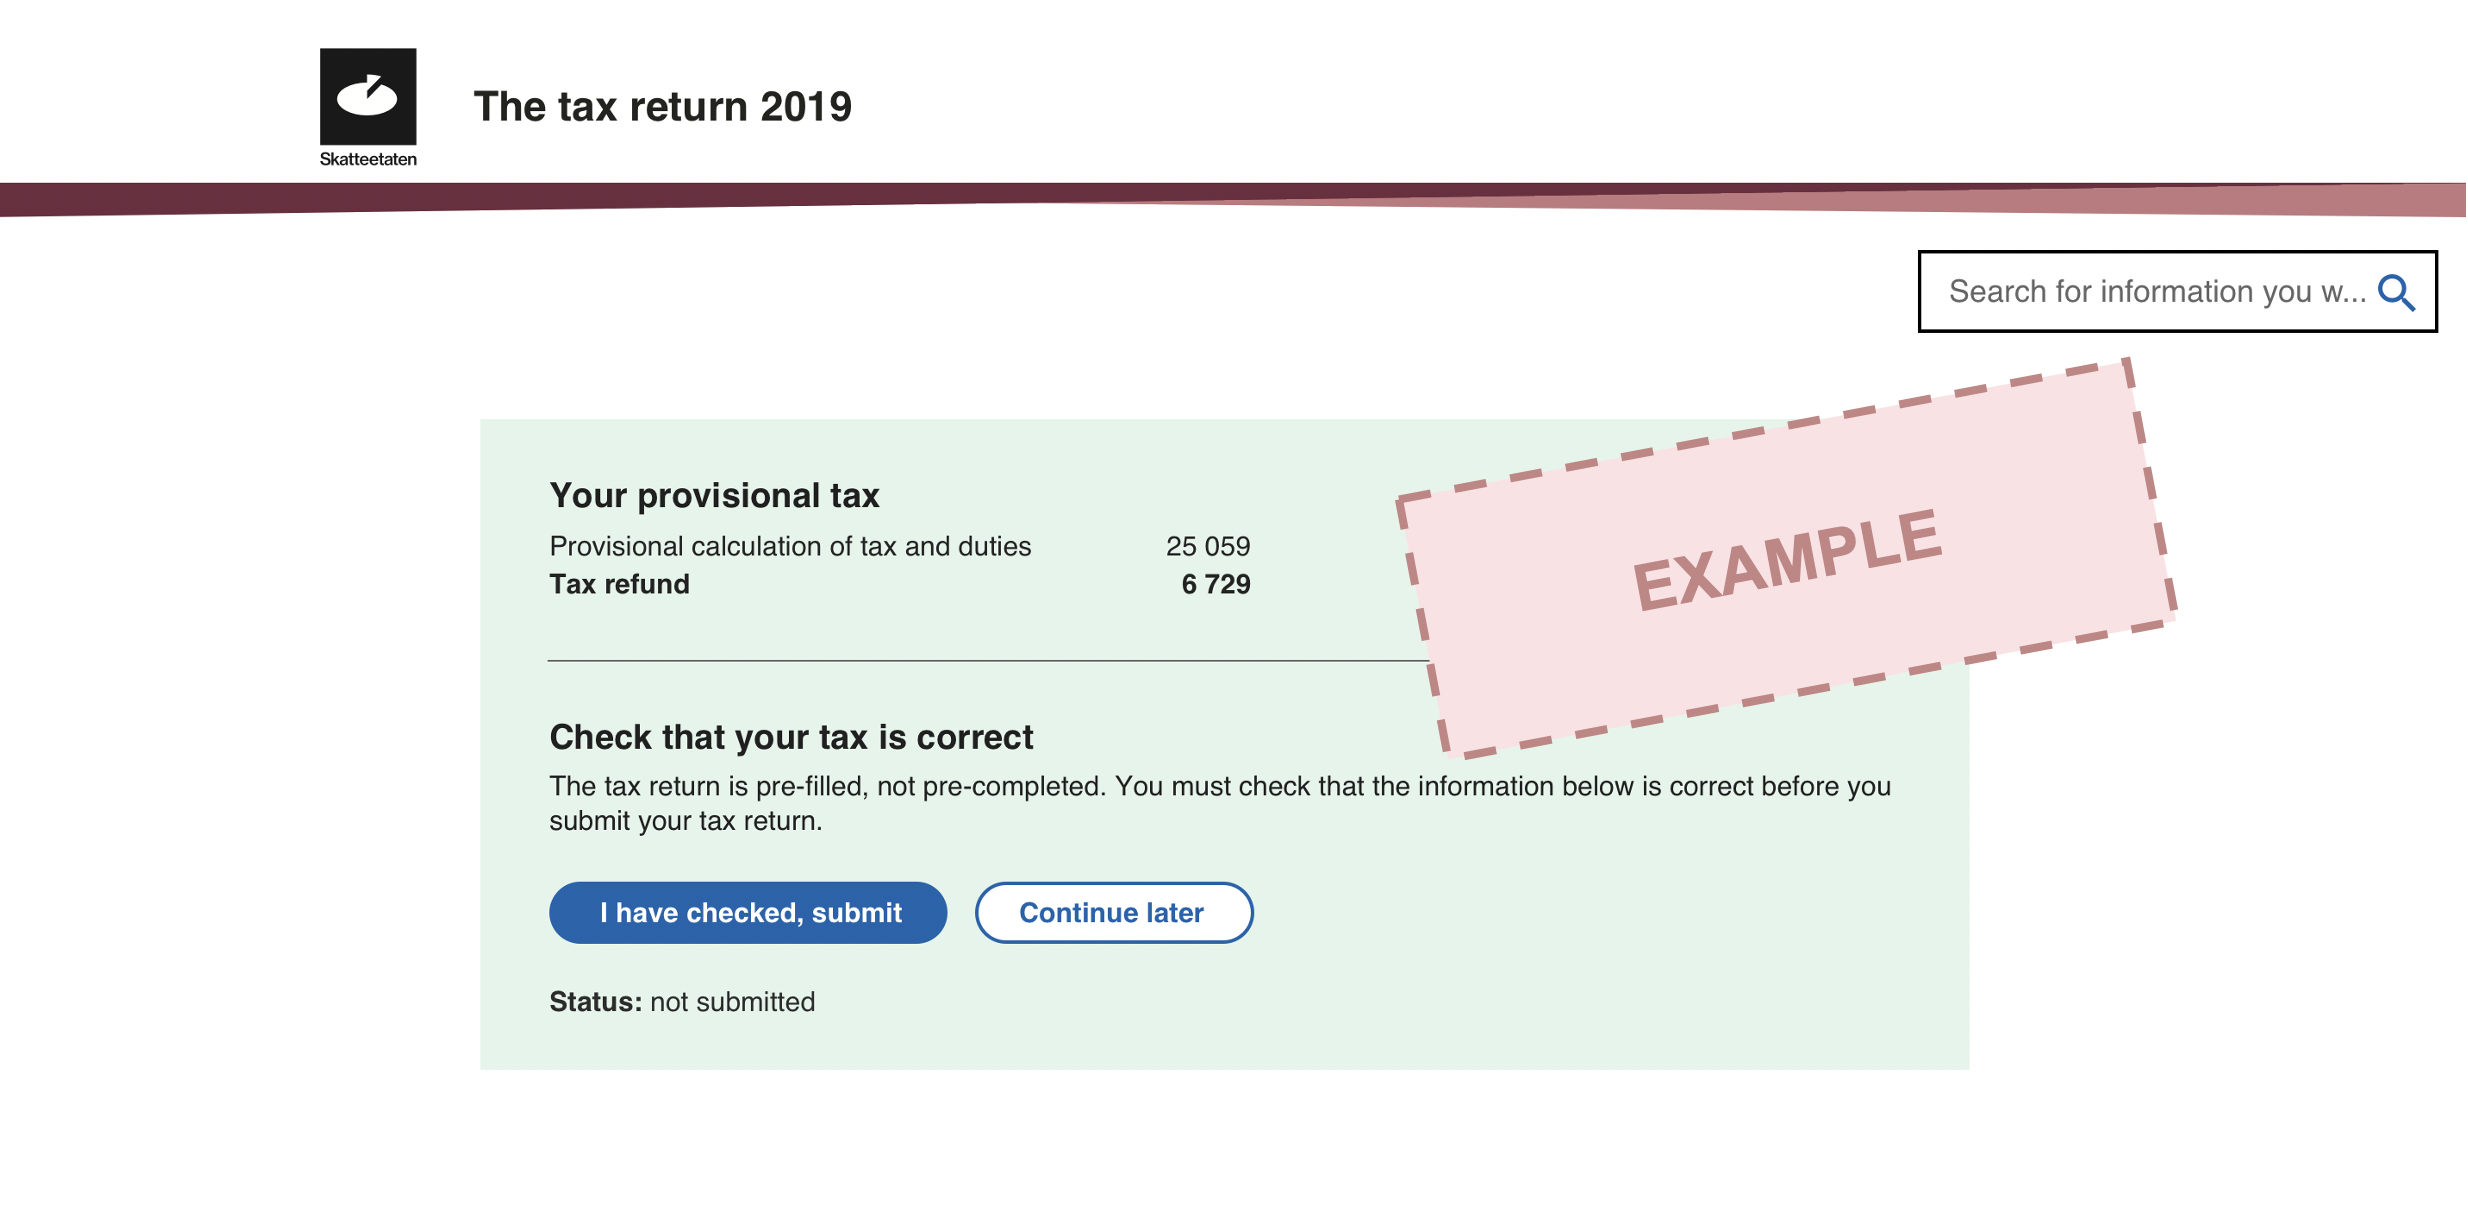 quality scarf scramble In 2021, most people will receive the new tax return - The Norwegian Tax  Administration